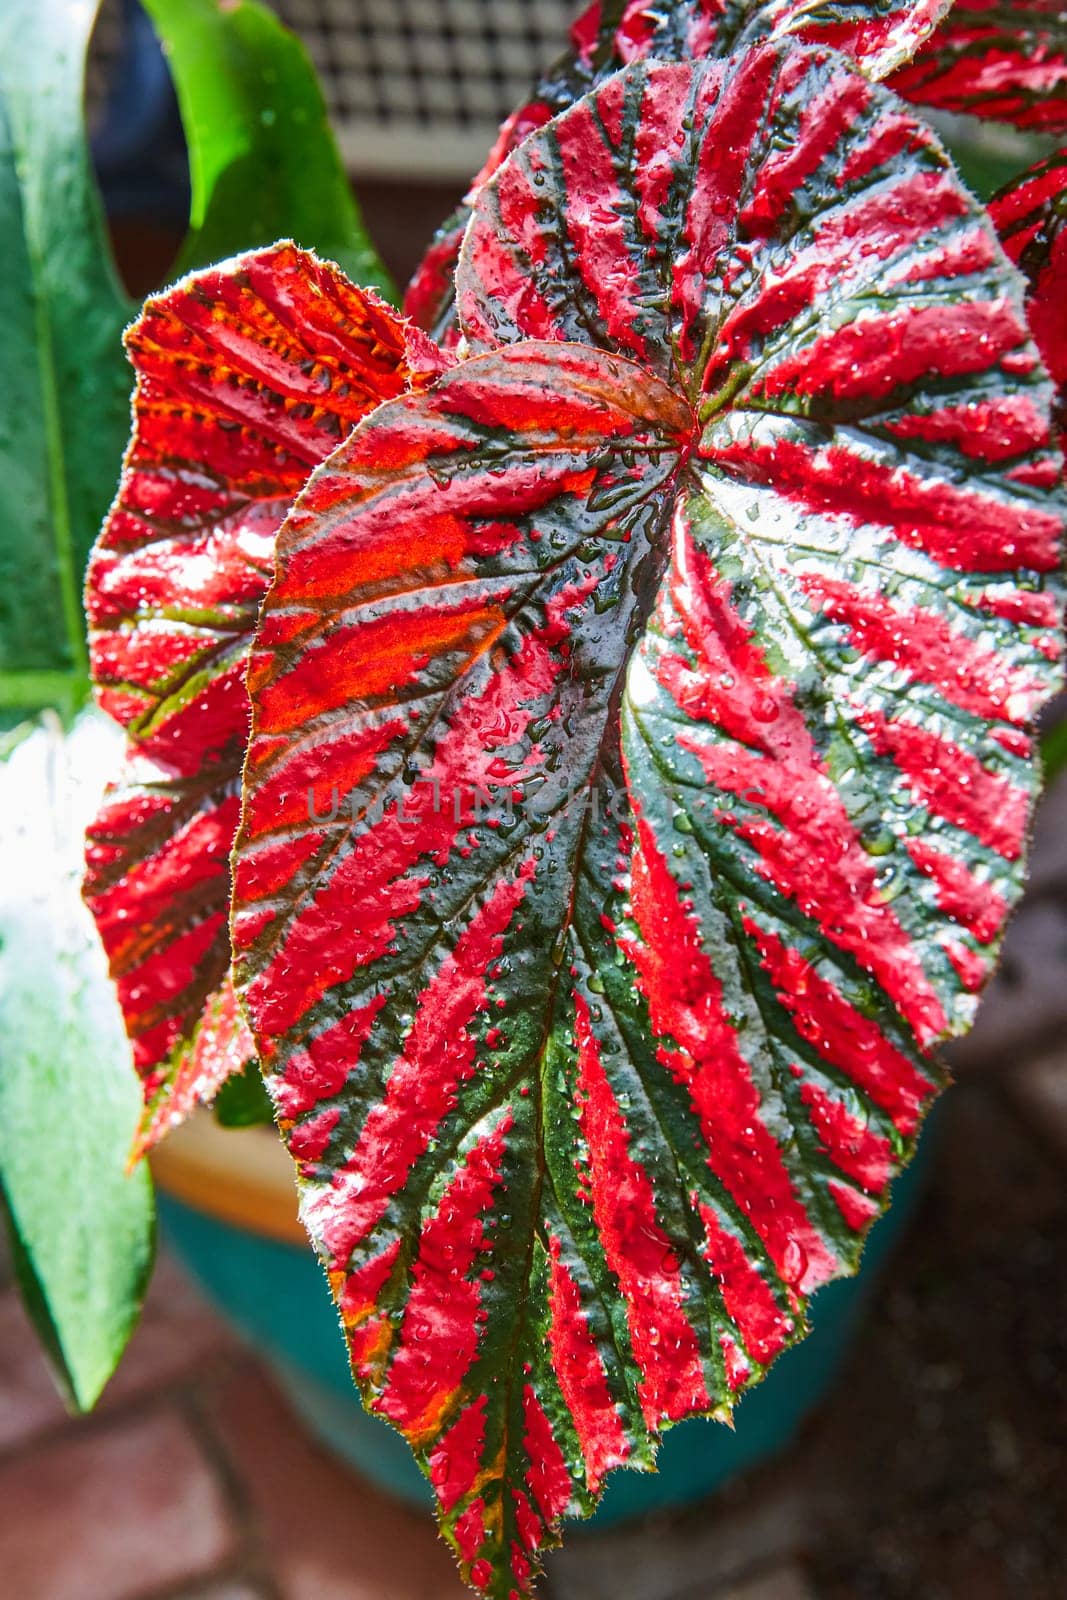 Vibrant Red and Green Leaf with Water Droplets, Conservatory Close-Up by njproductions